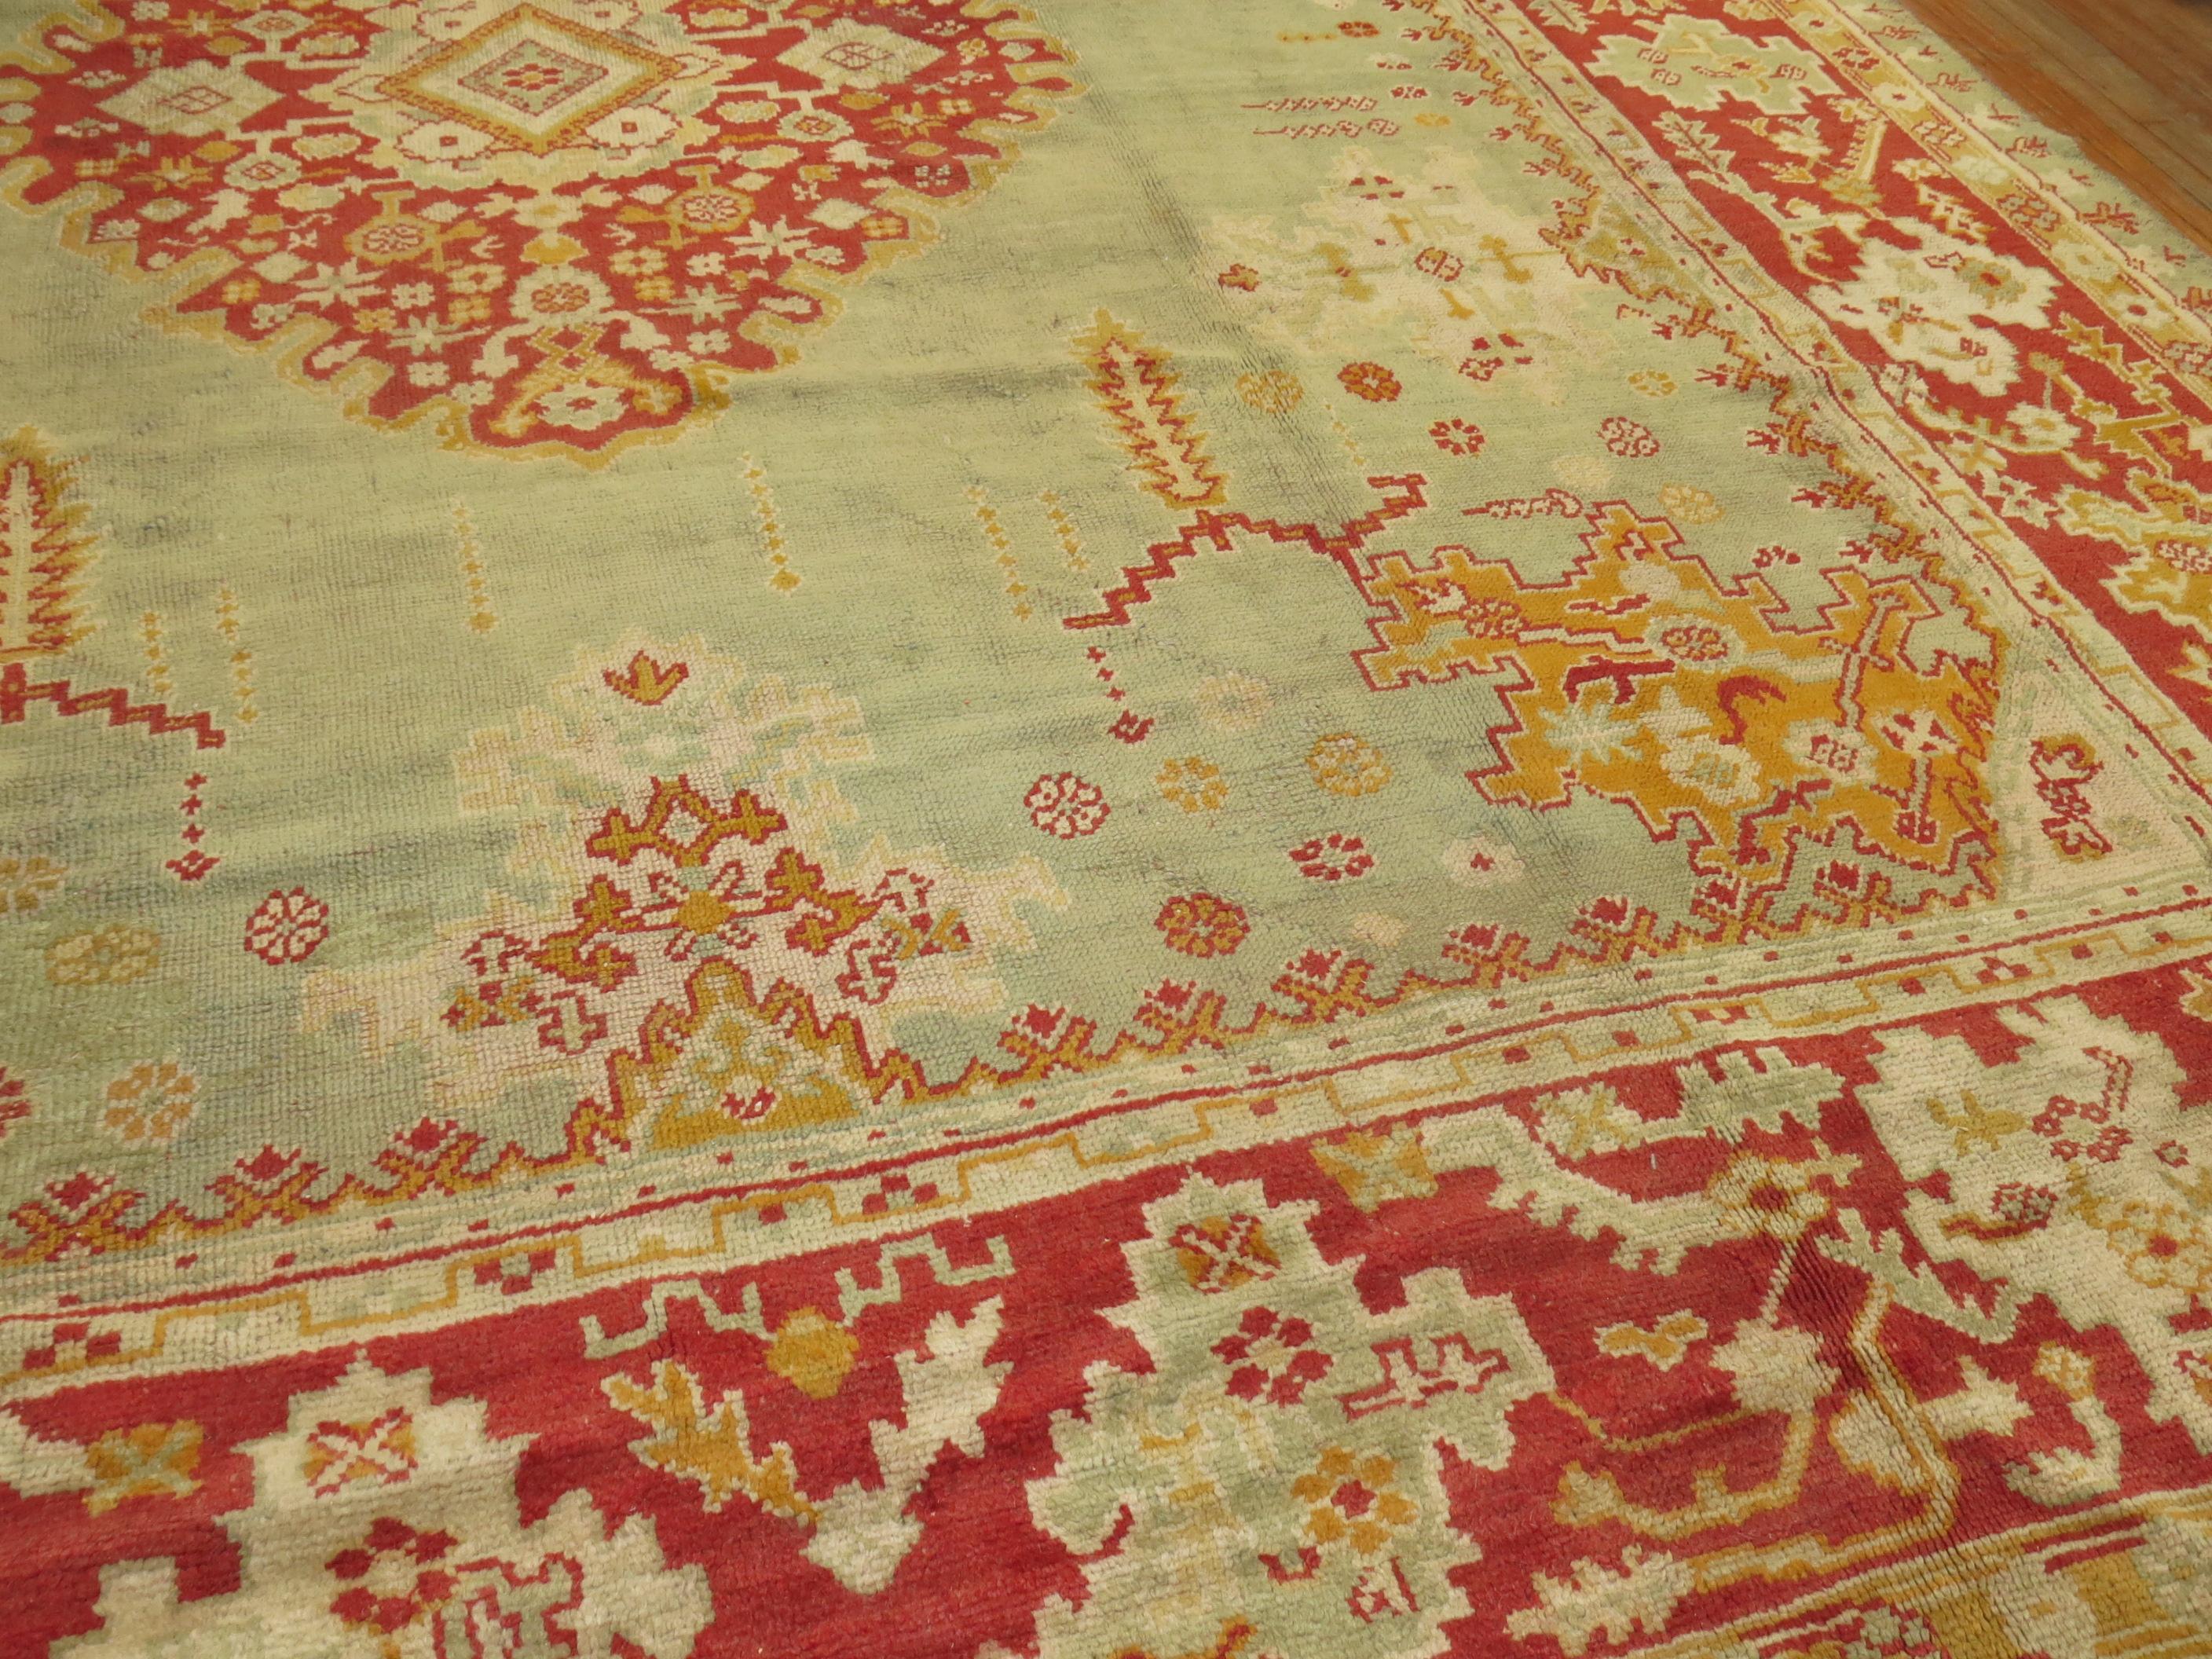 A large square early 20th-century antique Turkish Oushak rug with a light green field and red border. Full pile condition. 

Measures: 13'8” x 15'3”

Oushak rugs originated in the small town of Oushak in west-central Anatolia, today just south of